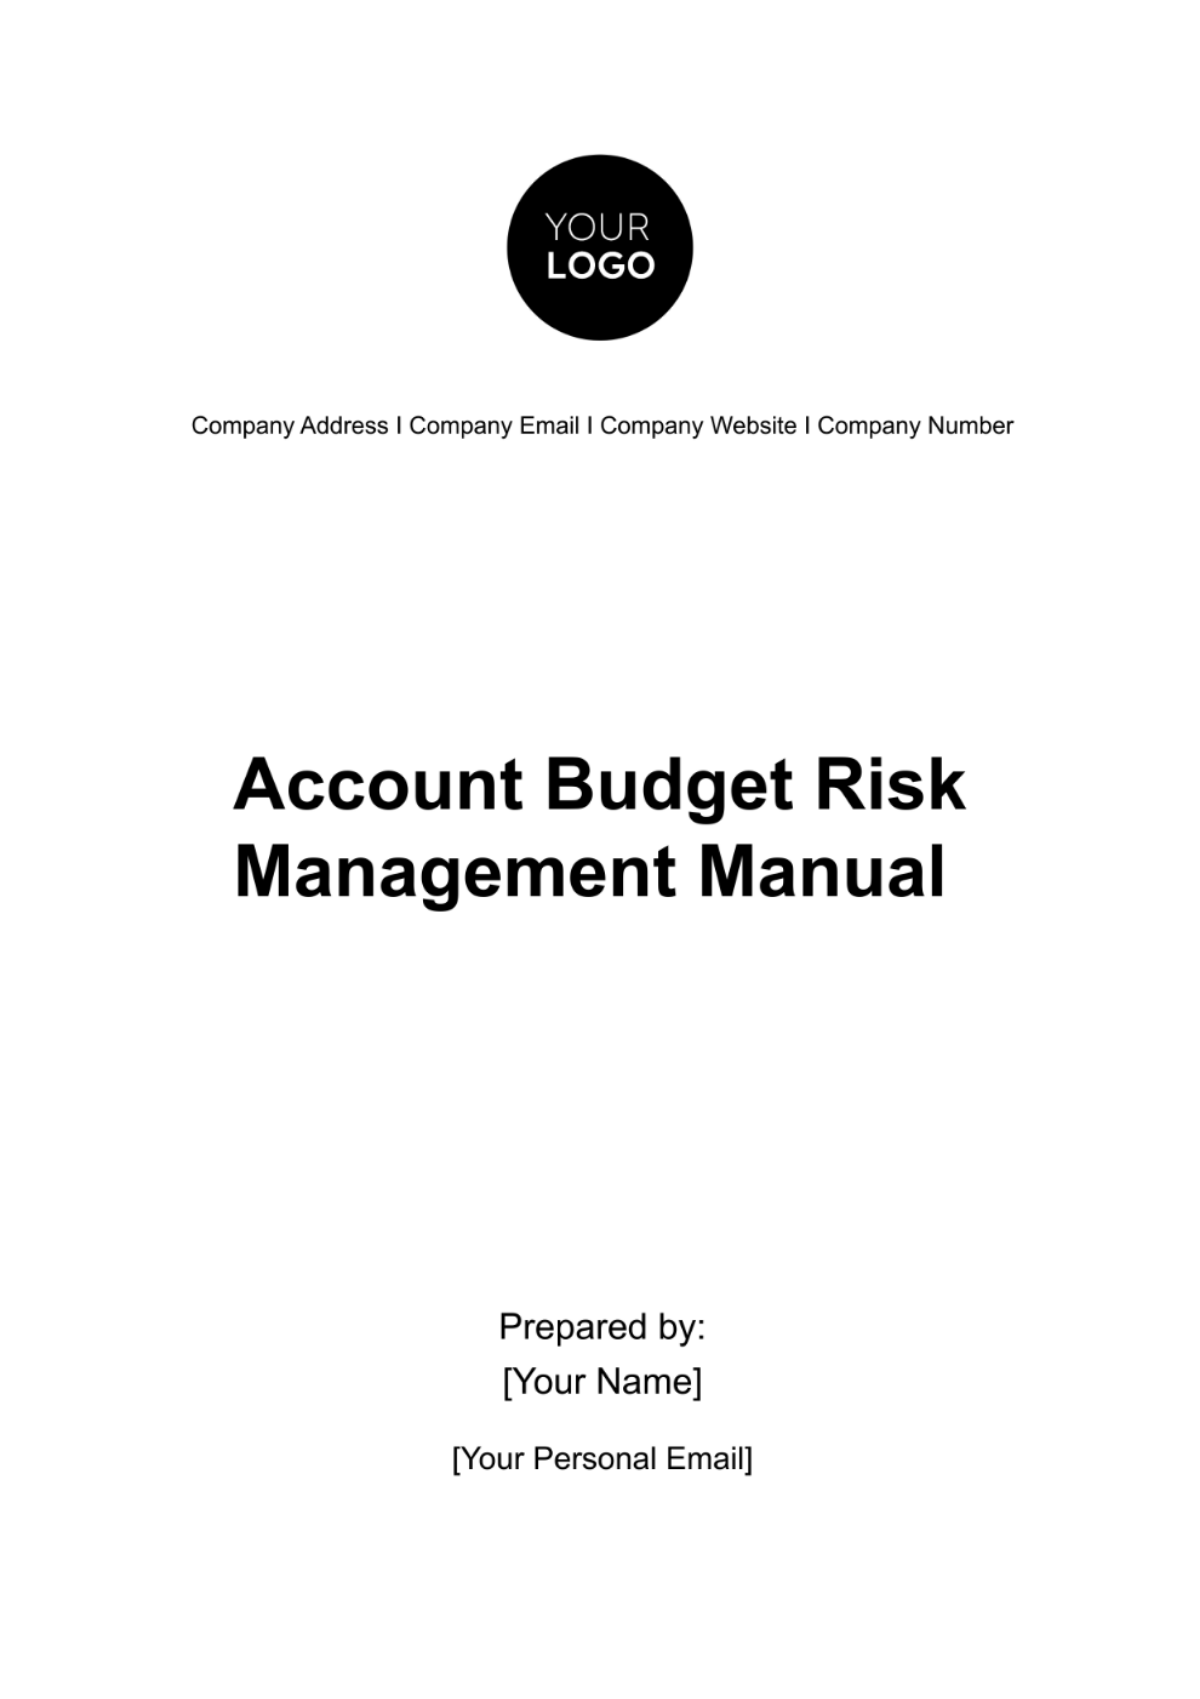 Account Budget Risk Management Manual Template